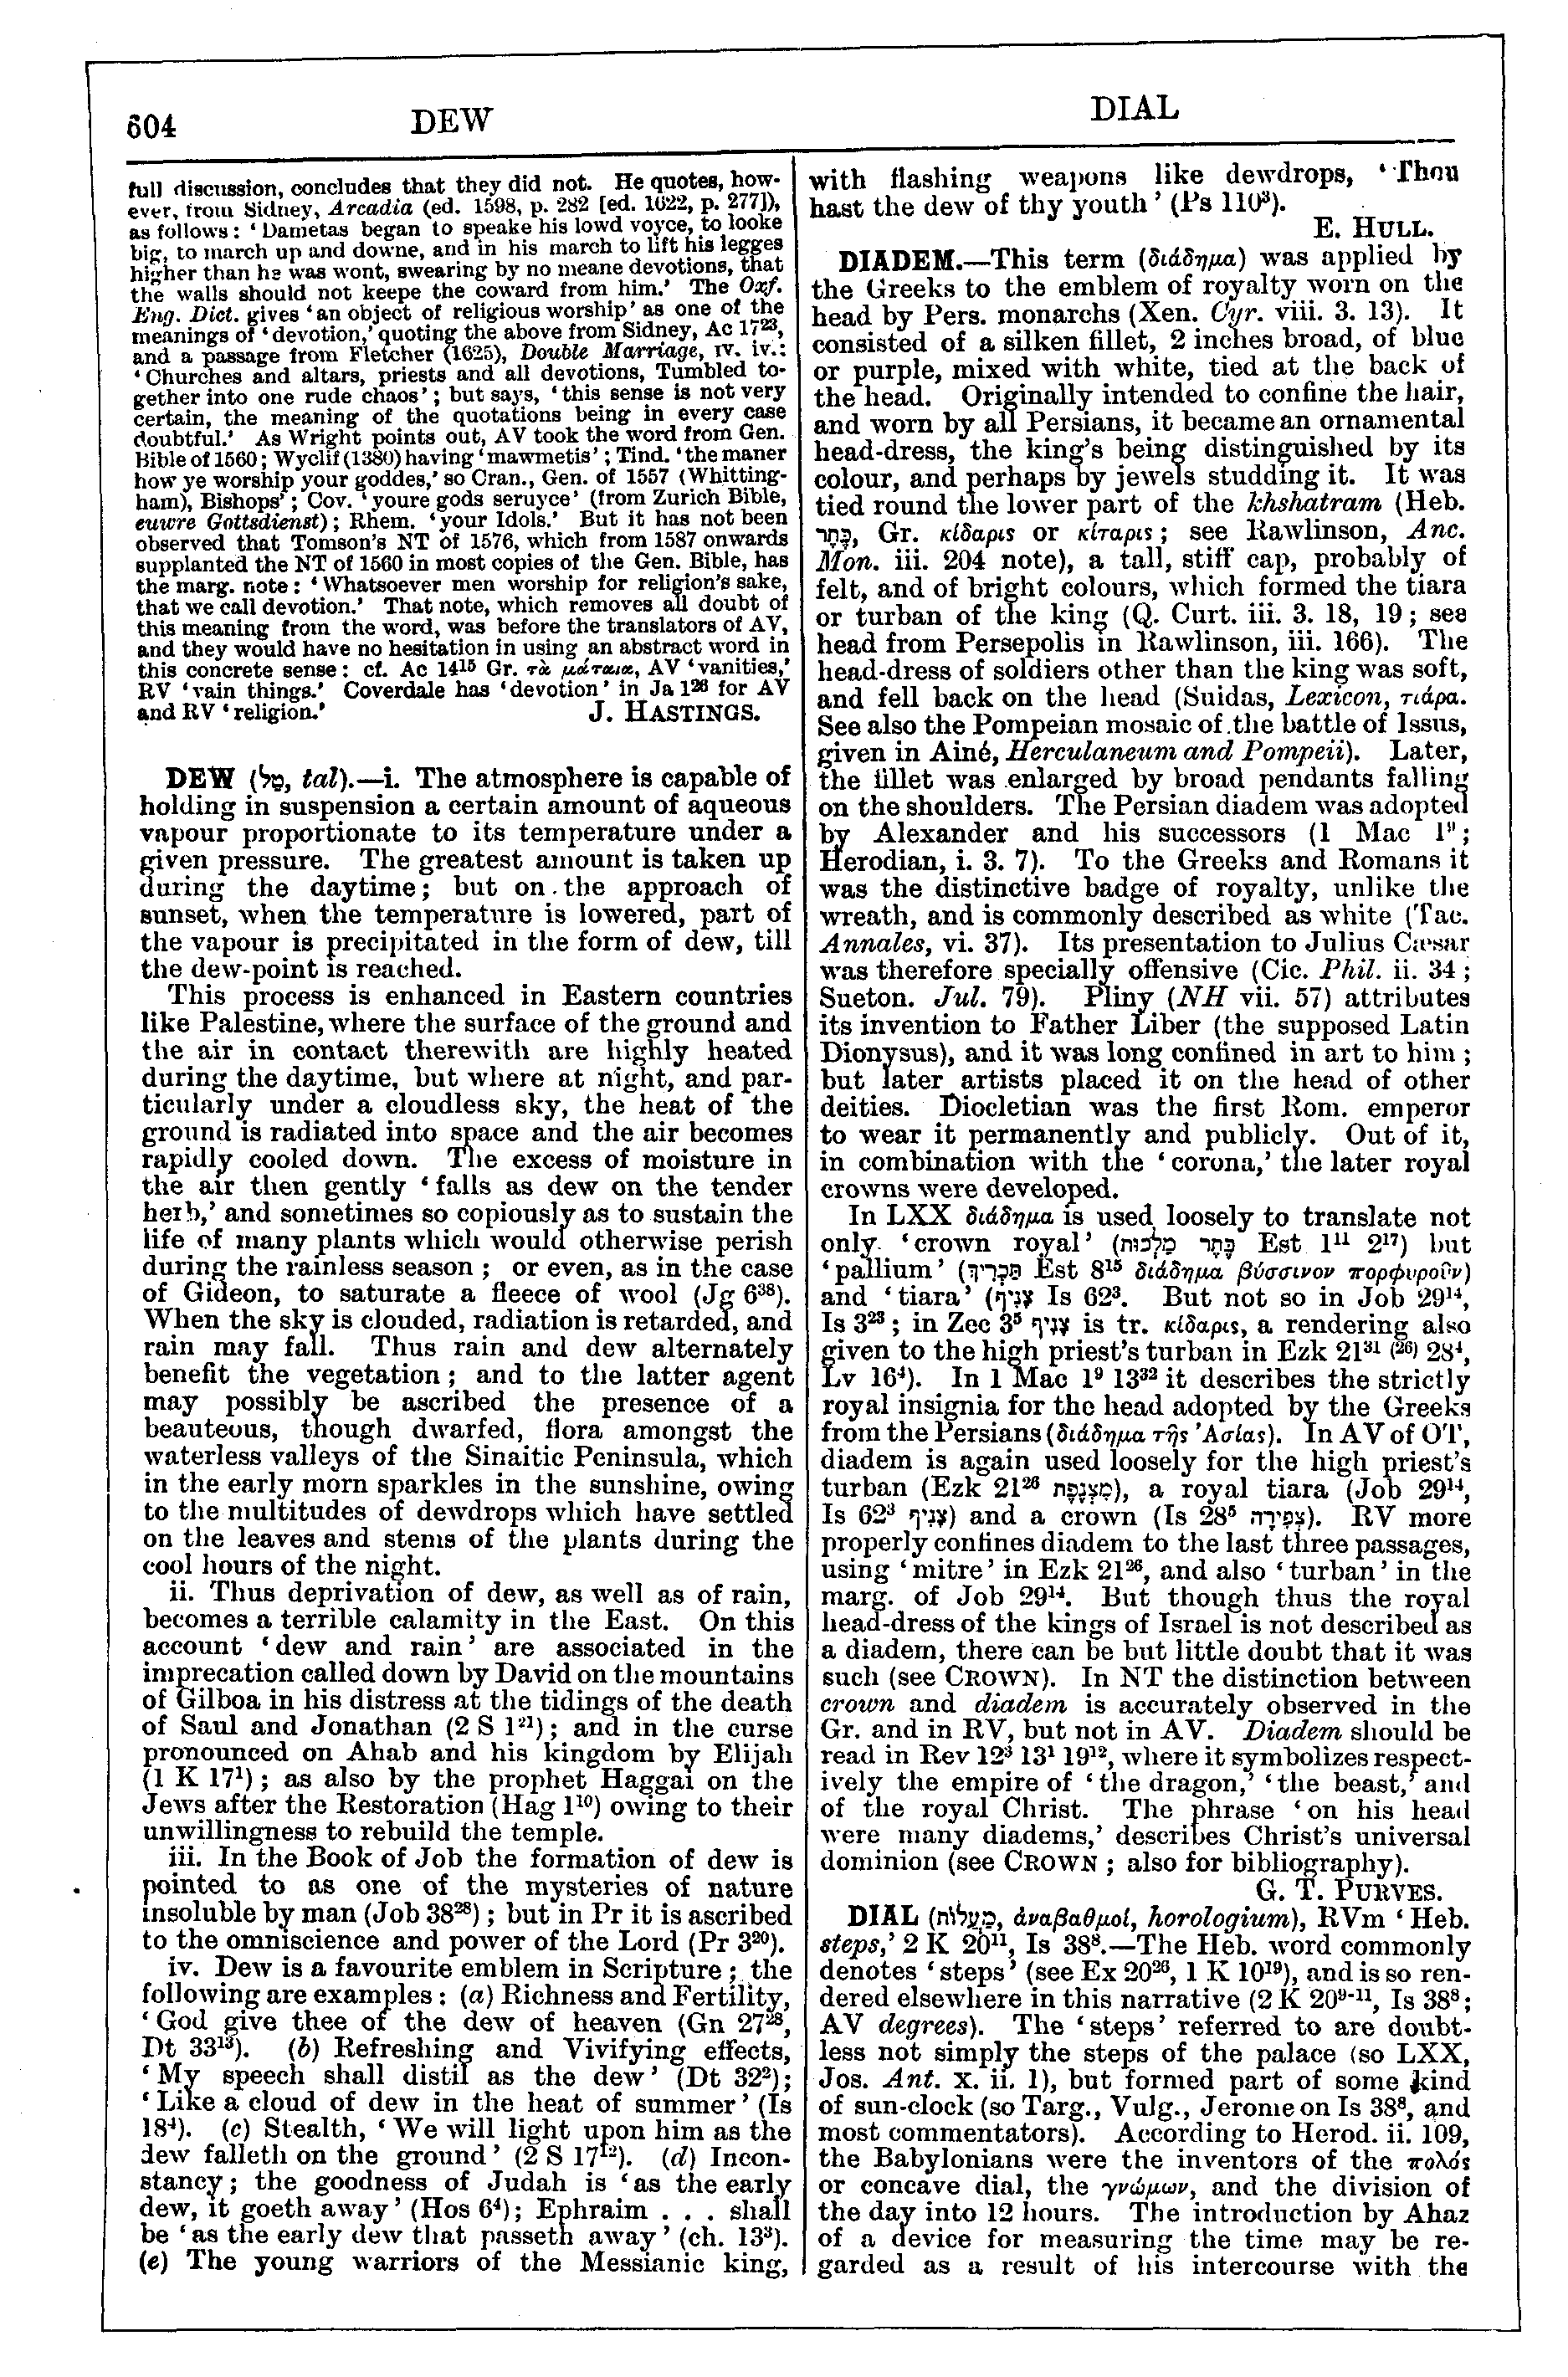 Image of page 604